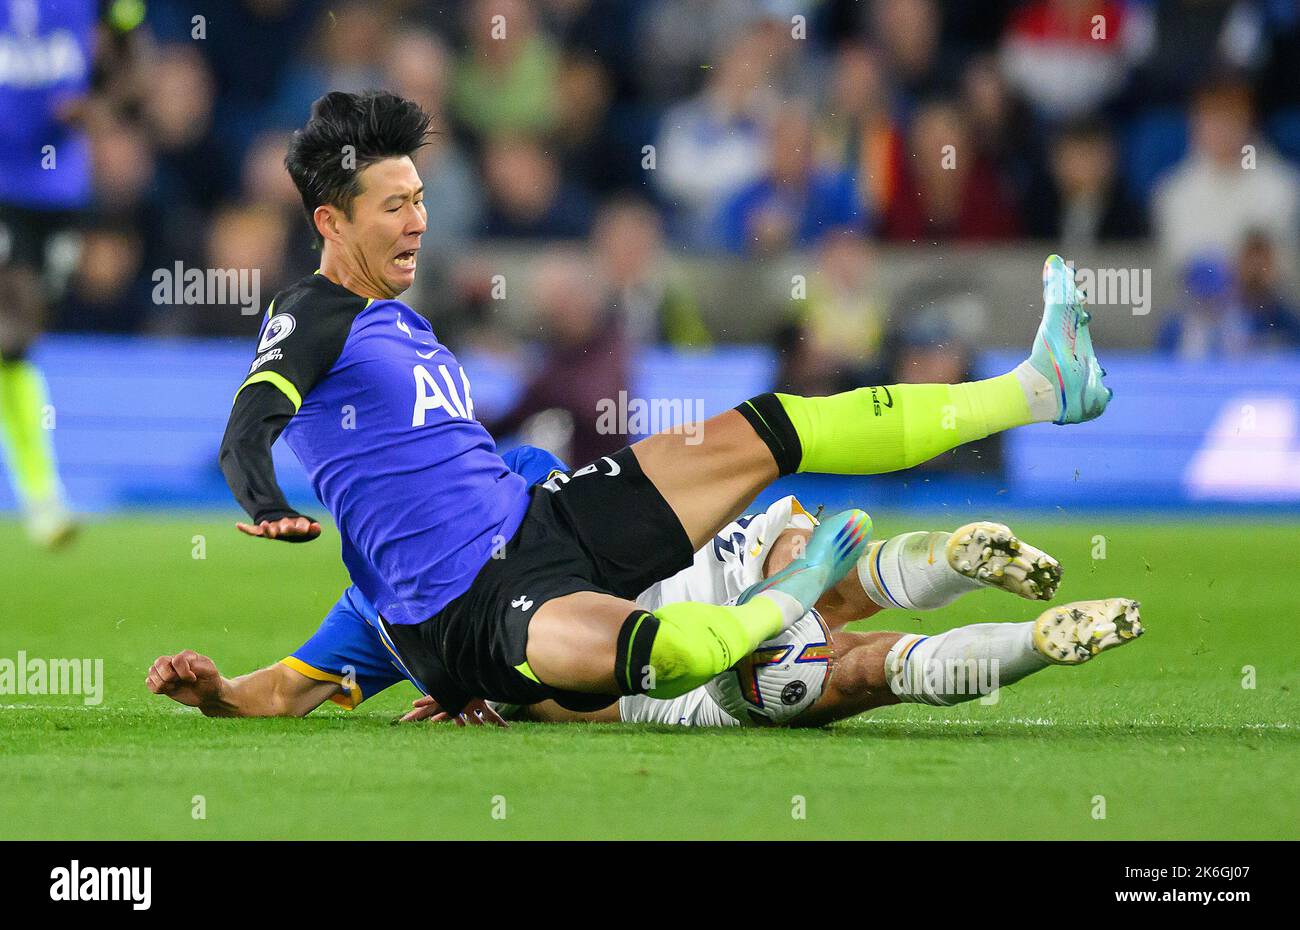 08 Oct 2022 - Brighton and Hove Albion v Tottenham Hotspur - Premier League - Amex Stadium  Tottenham's Heung-Min Son is tackled by Joël Veltman during the Premier League match at the Amex Stadium. Picture : Mark Pain / Alamy Live News Stock Photo